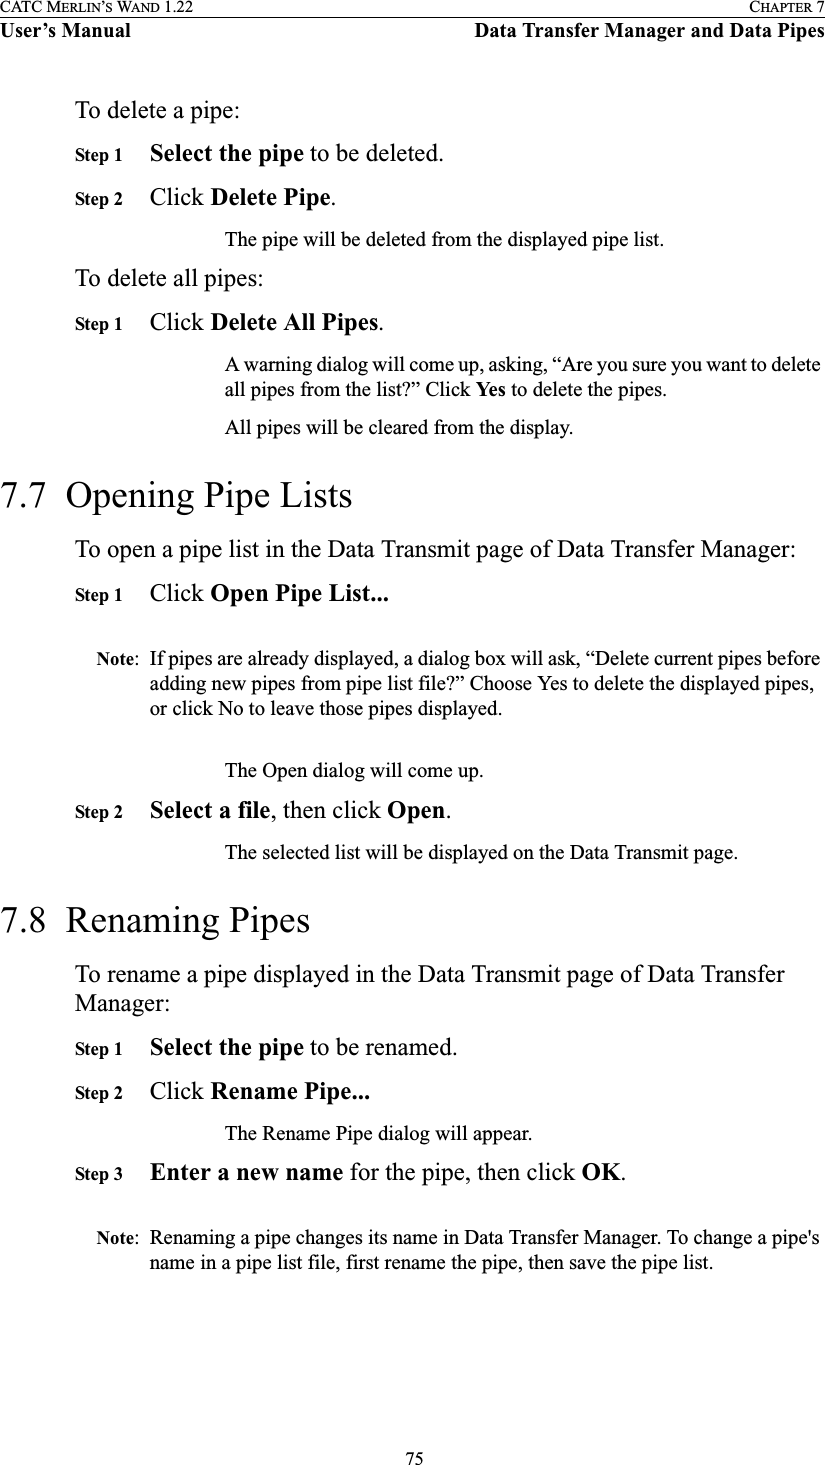  75CATC MERLIN’S WAND 1.22 CHAPTER 7User’s Manual Data Transfer Manager and Data PipesTo delete a pipe:Step 1 Select the pipe to be deleted.Step 2 Click Delete Pipe.The pipe will be deleted from the displayed pipe list.To delete all pipes:Step 1 Click Delete All Pipes.A warning dialog will come up, asking, “Are you sure you want to delete all pipes from the list?” Click Yes  to delete the pipes.All pipes will be cleared from the display.7.7  Opening Pipe ListsTo open a pipe list in the Data Transmit page of Data Transfer Manager:Step 1 Click Open Pipe List...Note: If pipes are already displayed, a dialog box will ask, “Delete current pipes before adding new pipes from pipe list file?” Choose Yes to delete the displayed pipes, or click No to leave those pipes displayed.The Open dialog will come up.Step 2 Select a file, then click Open.The selected list will be displayed on the Data Transmit page.7.8  Renaming PipesTo rename a pipe displayed in the Data Transmit page of Data Transfer Manager:Step 1 Select the pipe to be renamed.Step 2 Click Rename Pipe...The Rename Pipe dialog will appear.Step 3 Enter a new name for the pipe, then click OK.Note: Renaming a pipe changes its name in Data Transfer Manager. To change a pipe&apos;s name in a pipe list file, first rename the pipe, then save the pipe list.